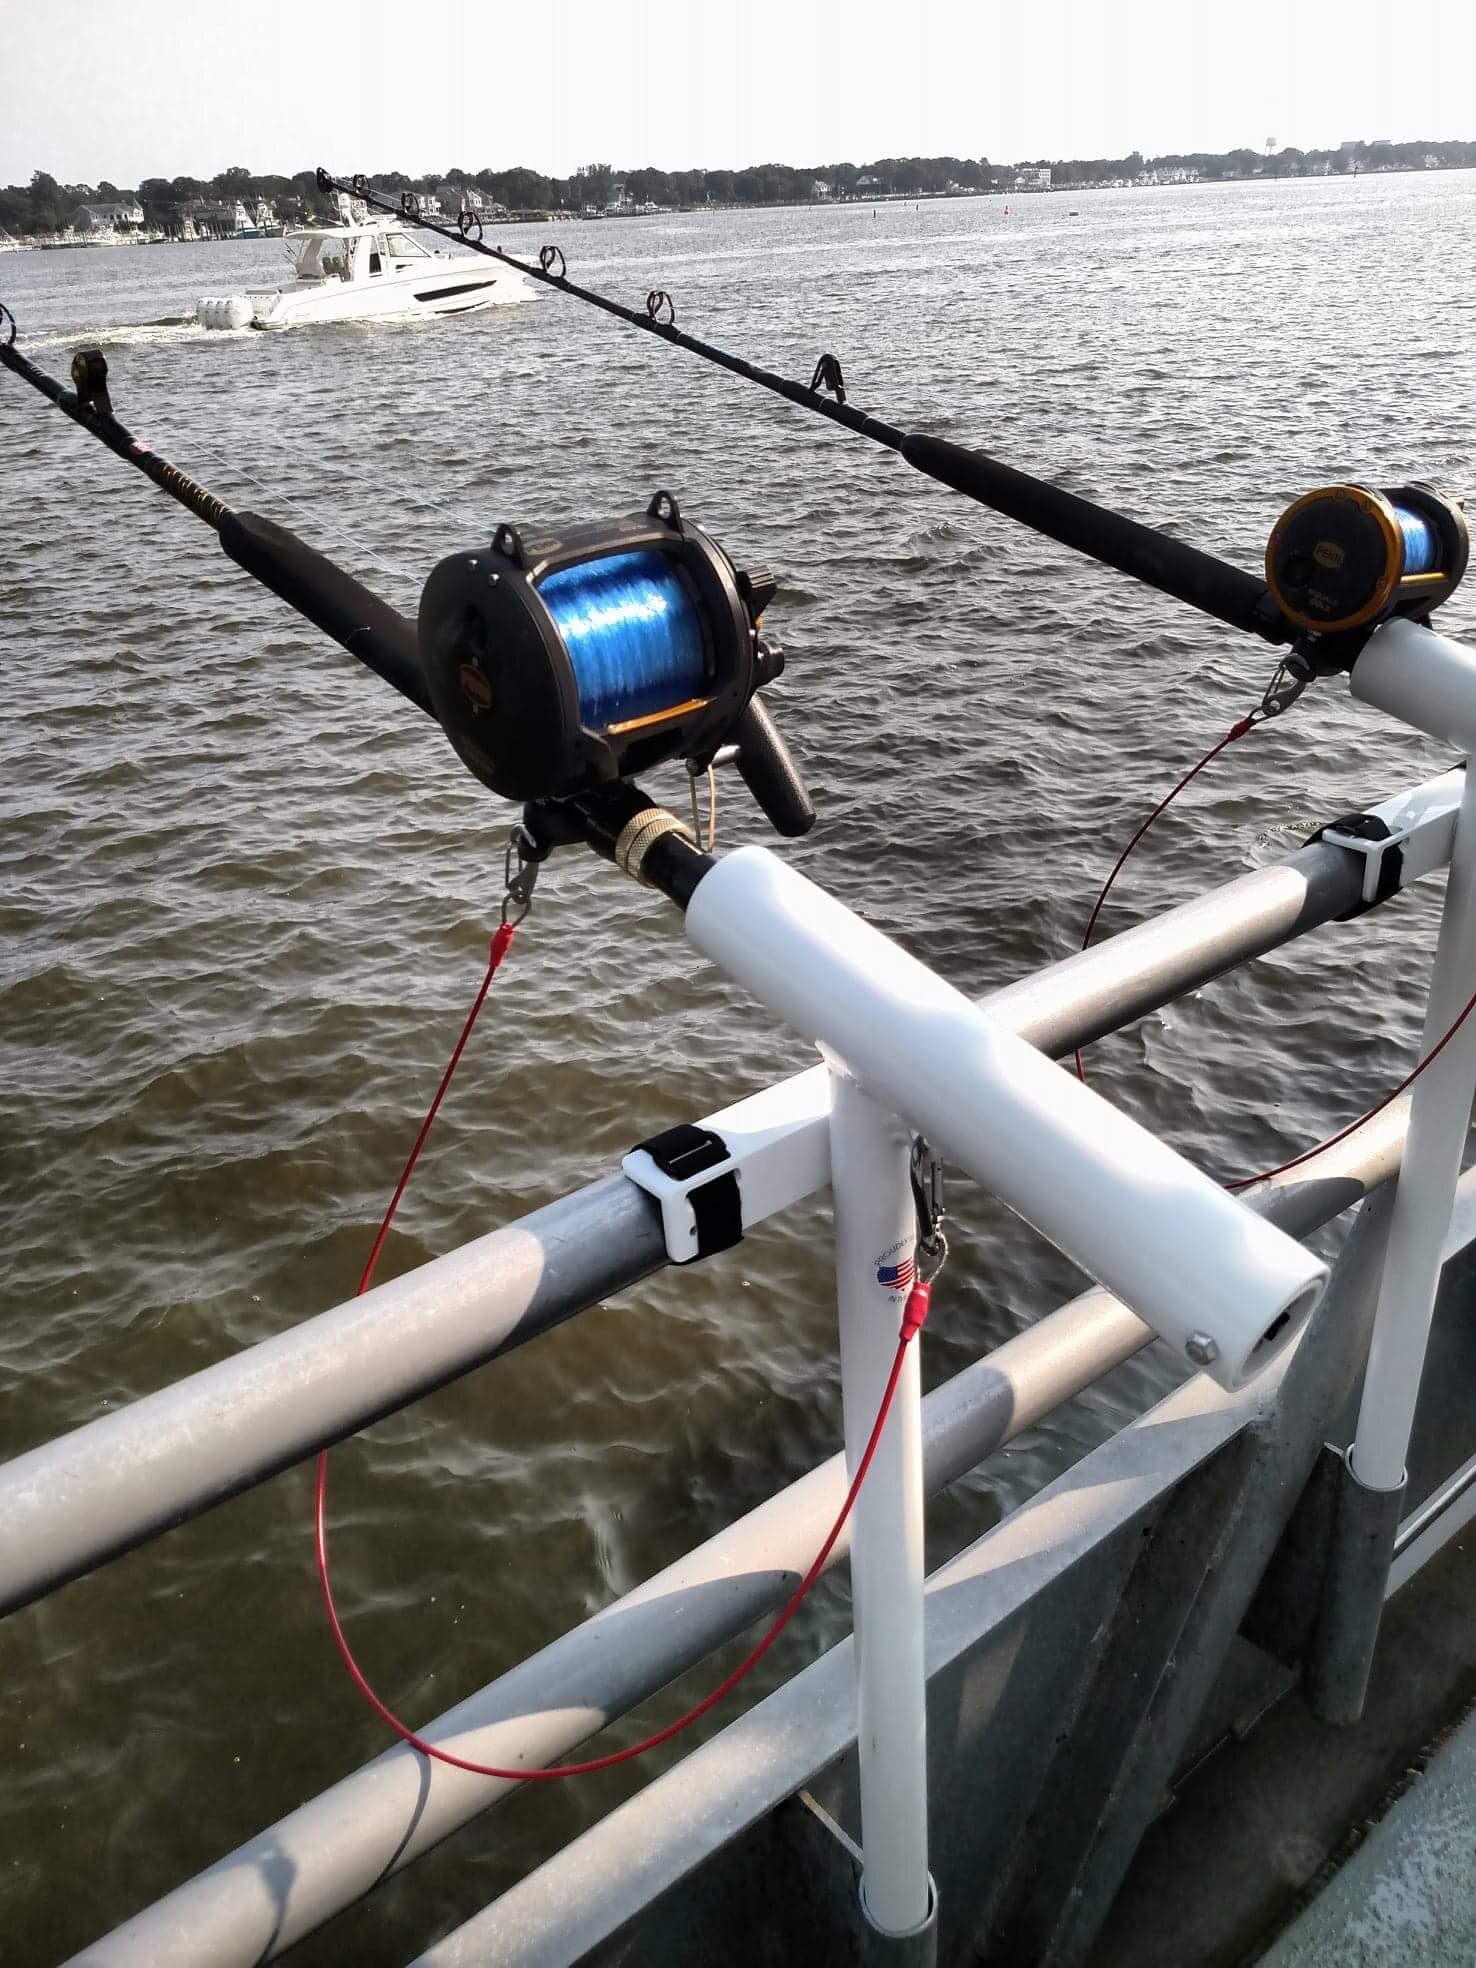 NEW PIER / DOCK FISHING ROD / POLE HOLDER ANGLED WITH SAFETY STRAP